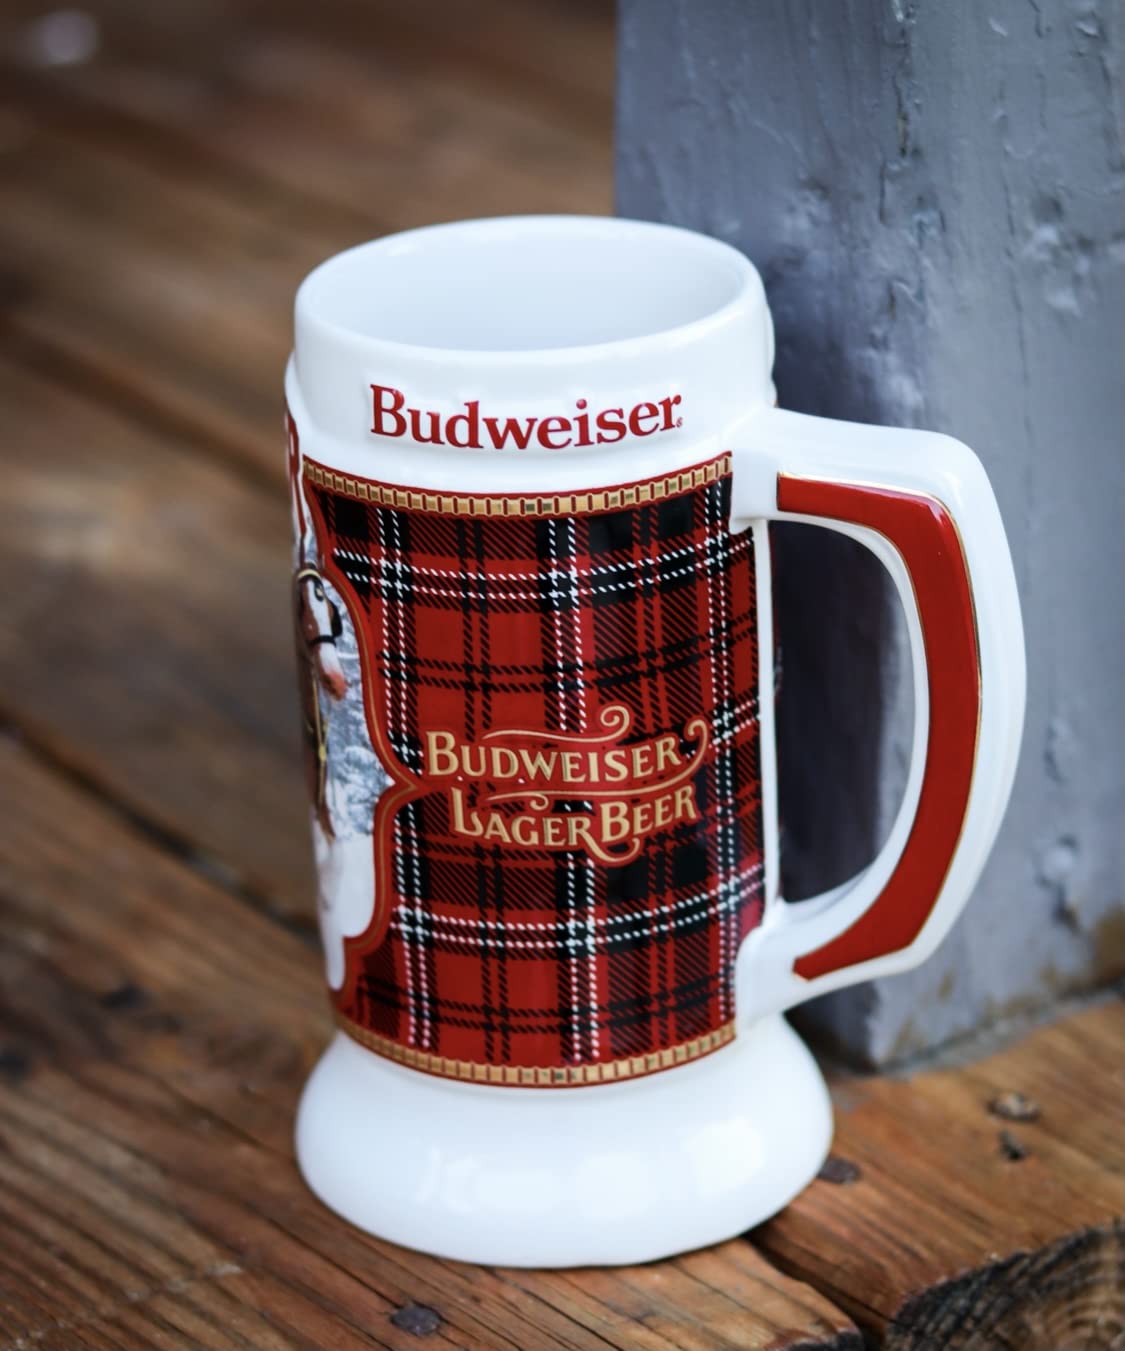 2021 Budweiser Plaid Holiday Christmas Stein,Red,white,black,gold,7inHx3.5inW